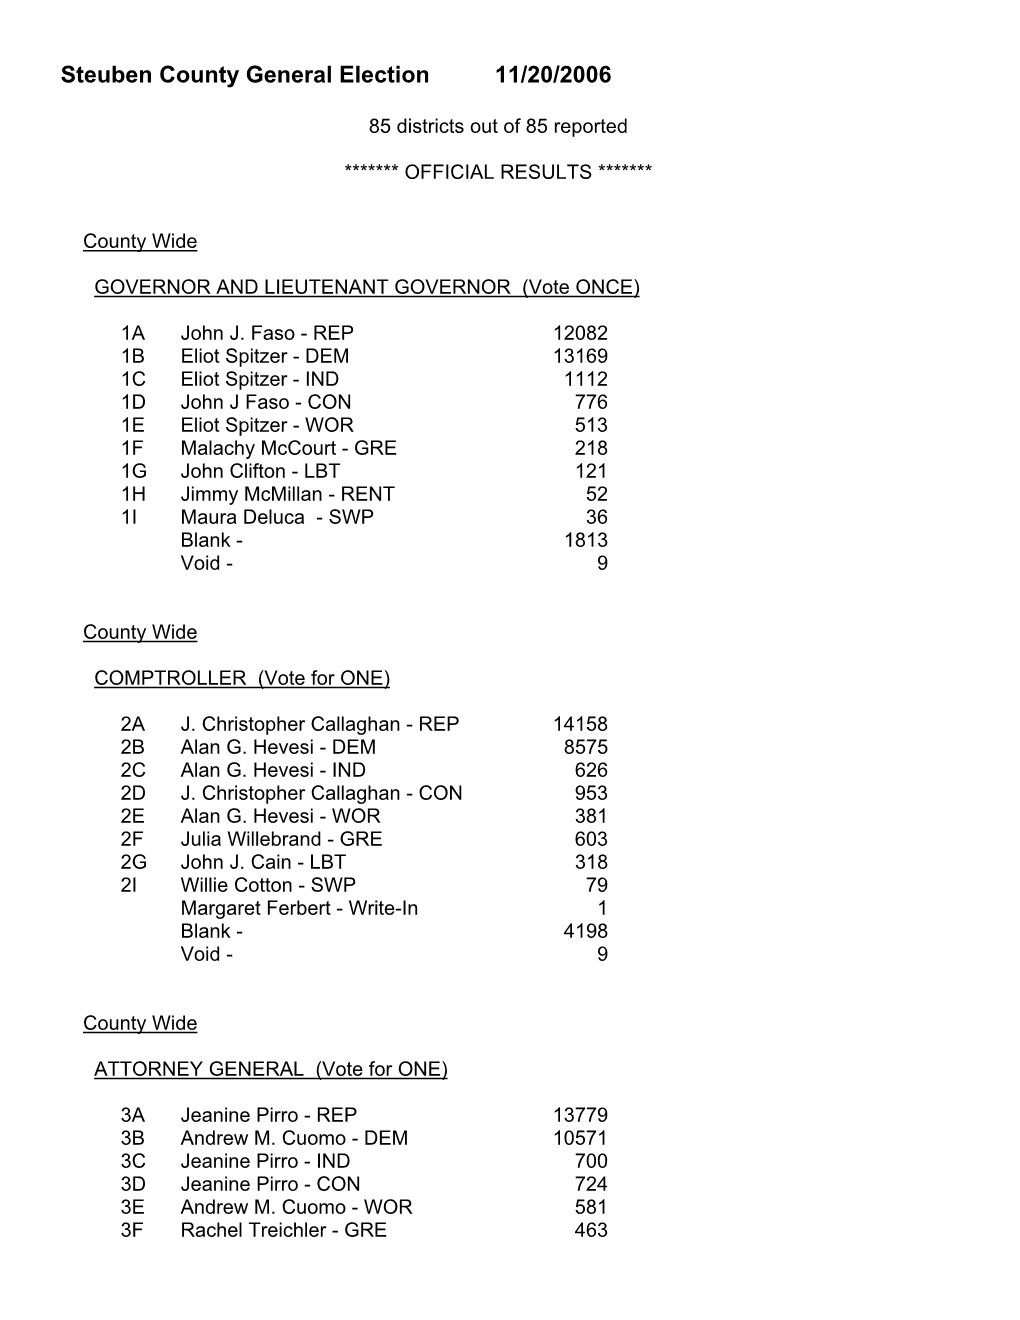 Steuben County 2006 General Election Results